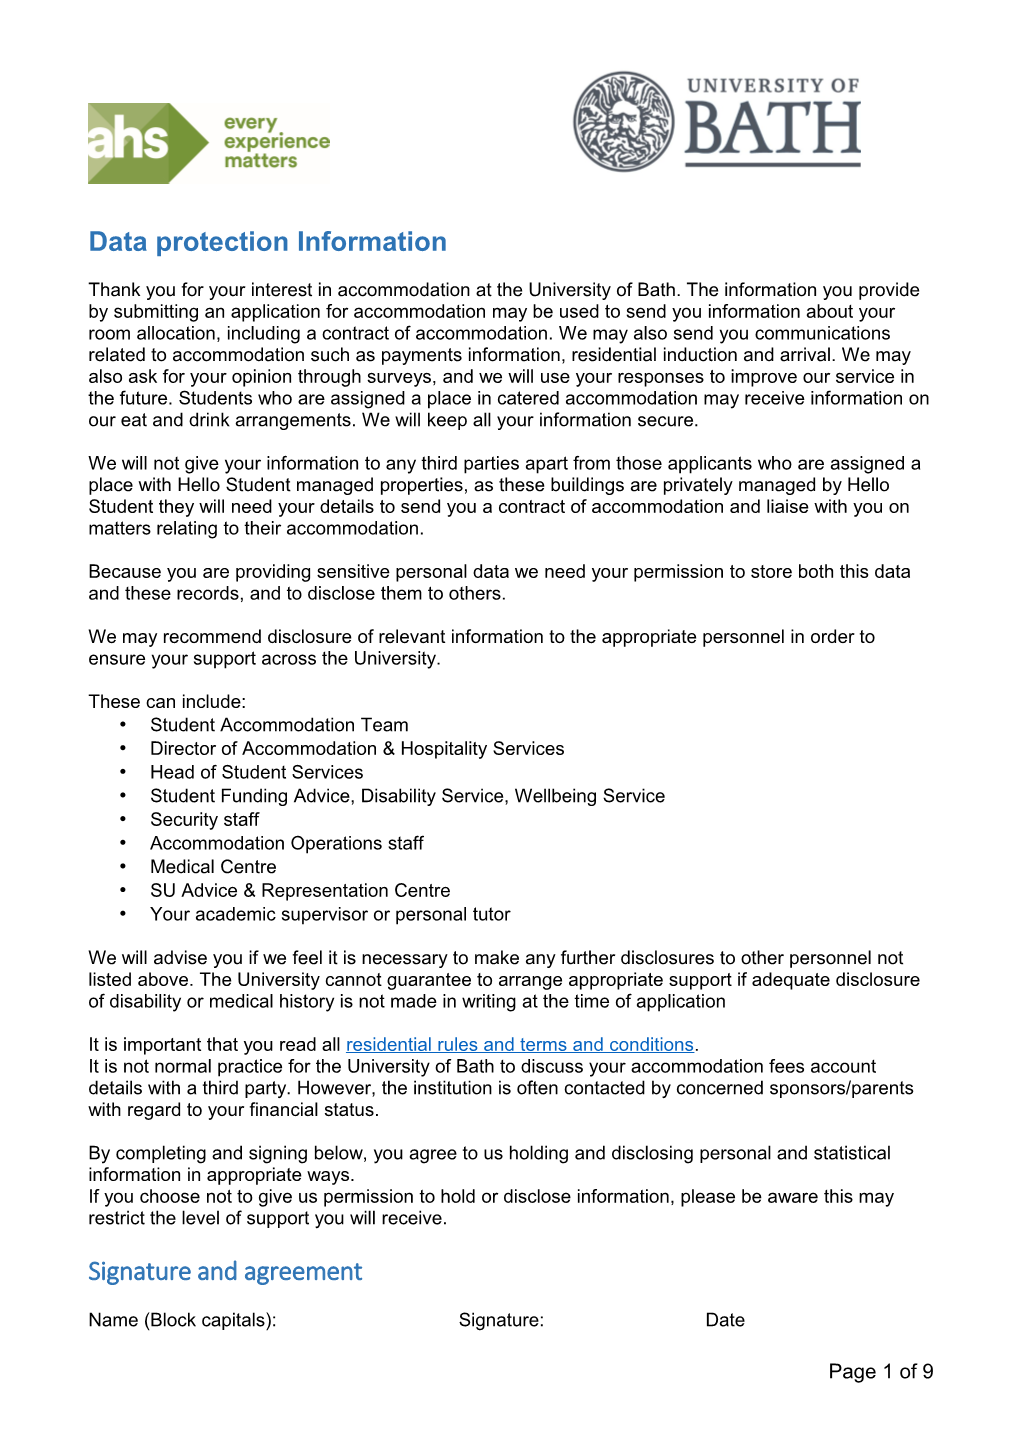 Data Protection Information